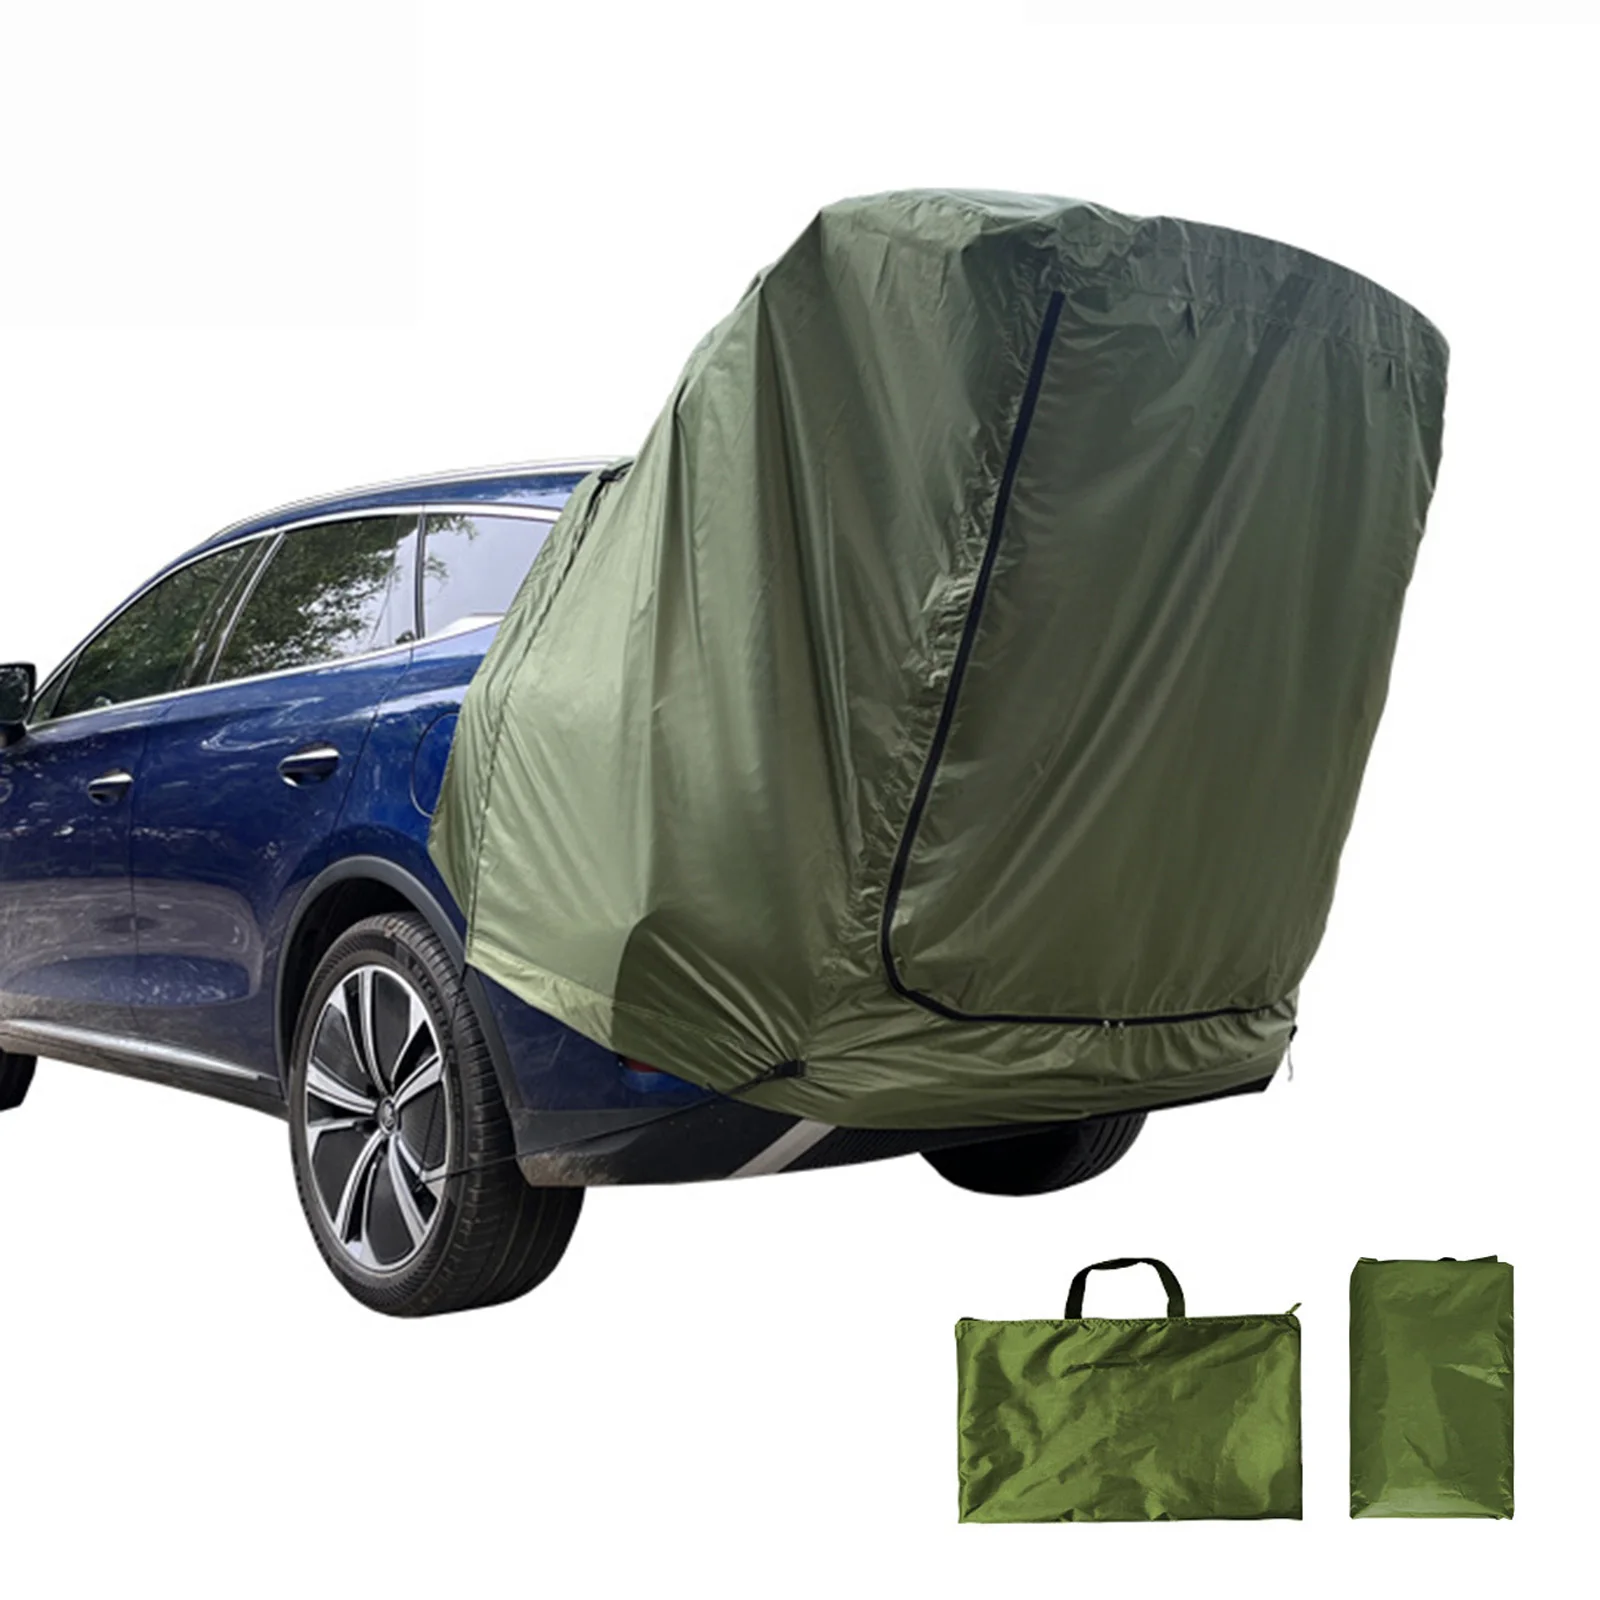 

Camping SUV Cabana Tent With Awning Shade Car Tailgate Tent Rear Tent Attachment 160 * 130 * 100cm / 63 * 51 * 39in